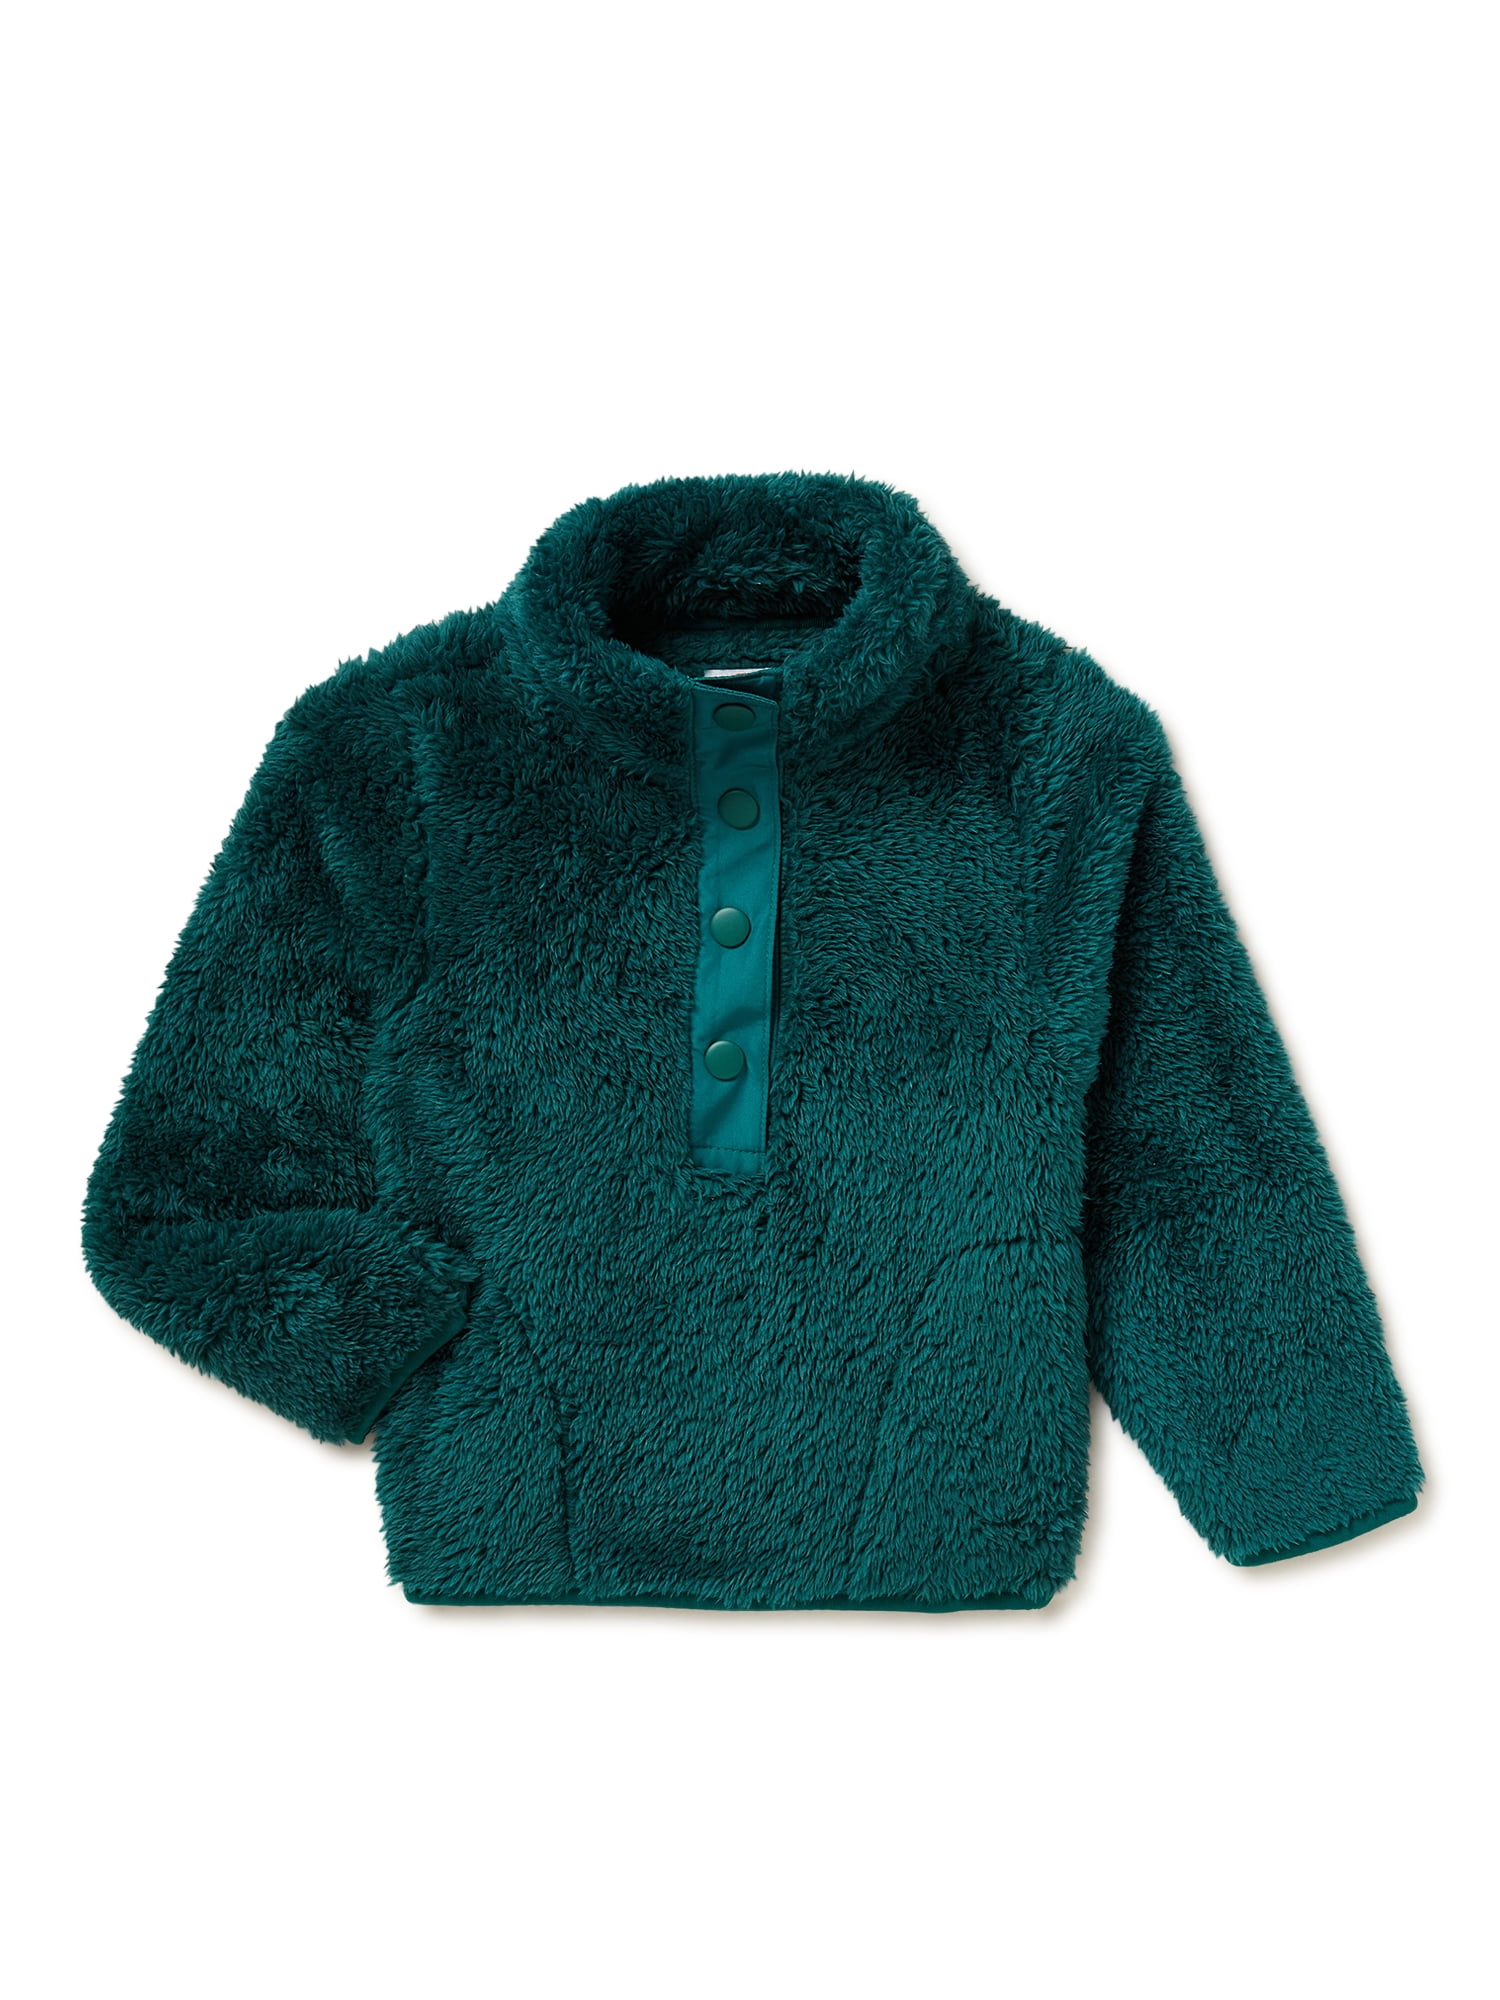 Wonder Nation Baby and Toddler Sherpa Pullover Jacket, Sizes 12M-5T ...